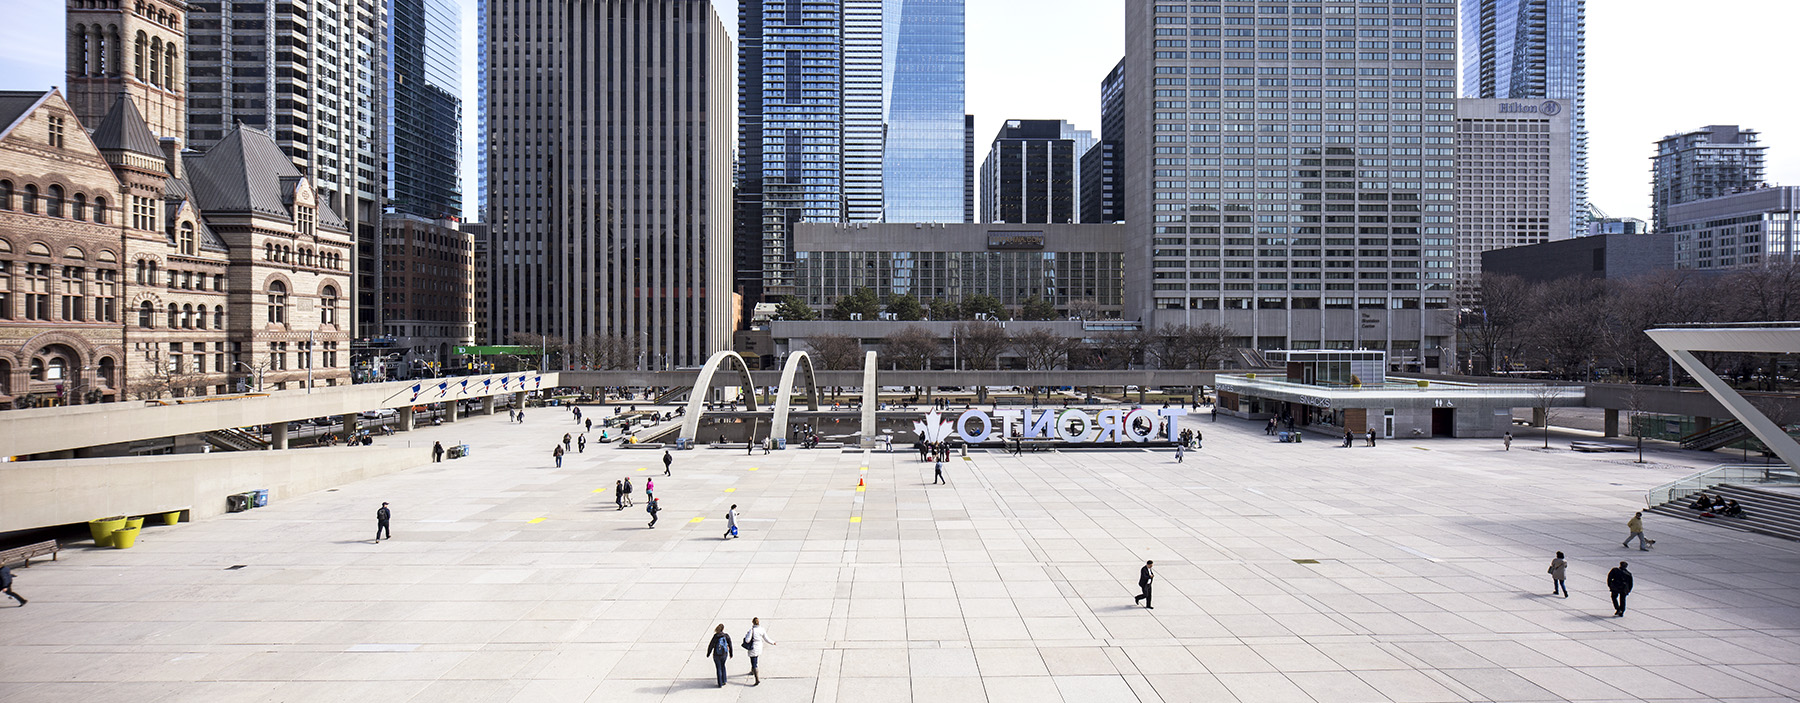 20170413. A wide-angle view of Nathan Phillips Square.